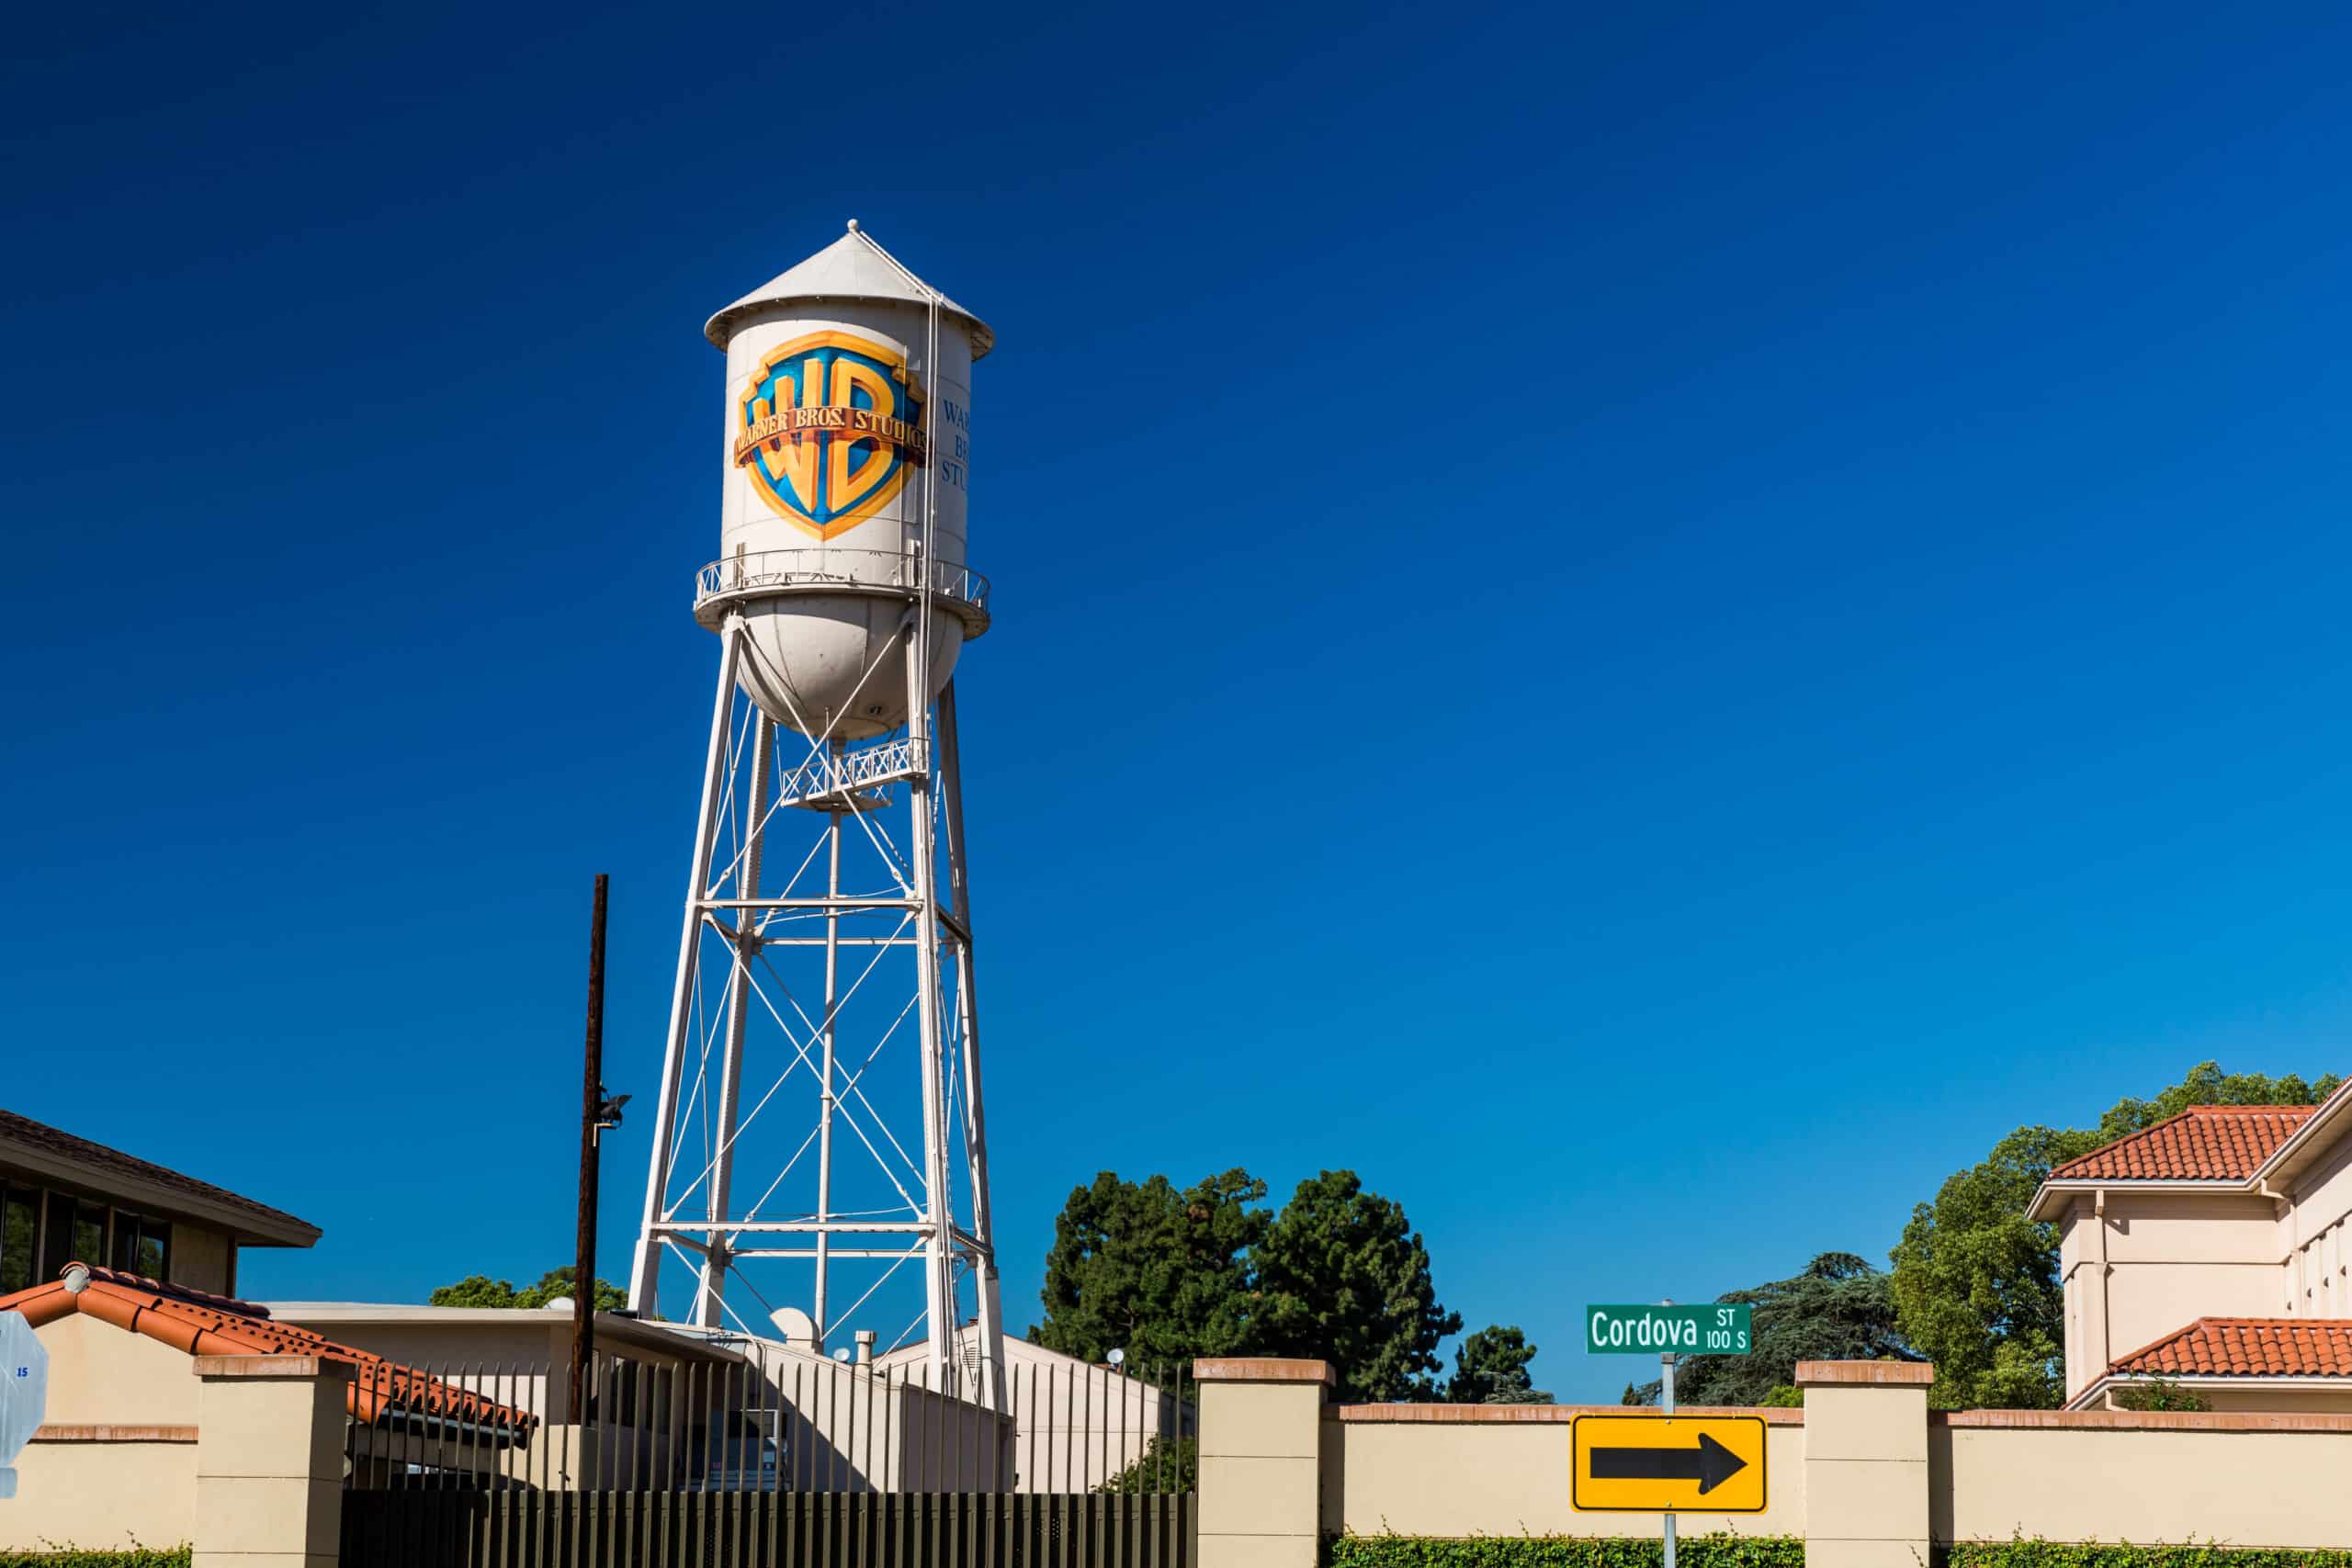 Thank you for storytelling of the best kind: Warner Brothers makes 100 years of history